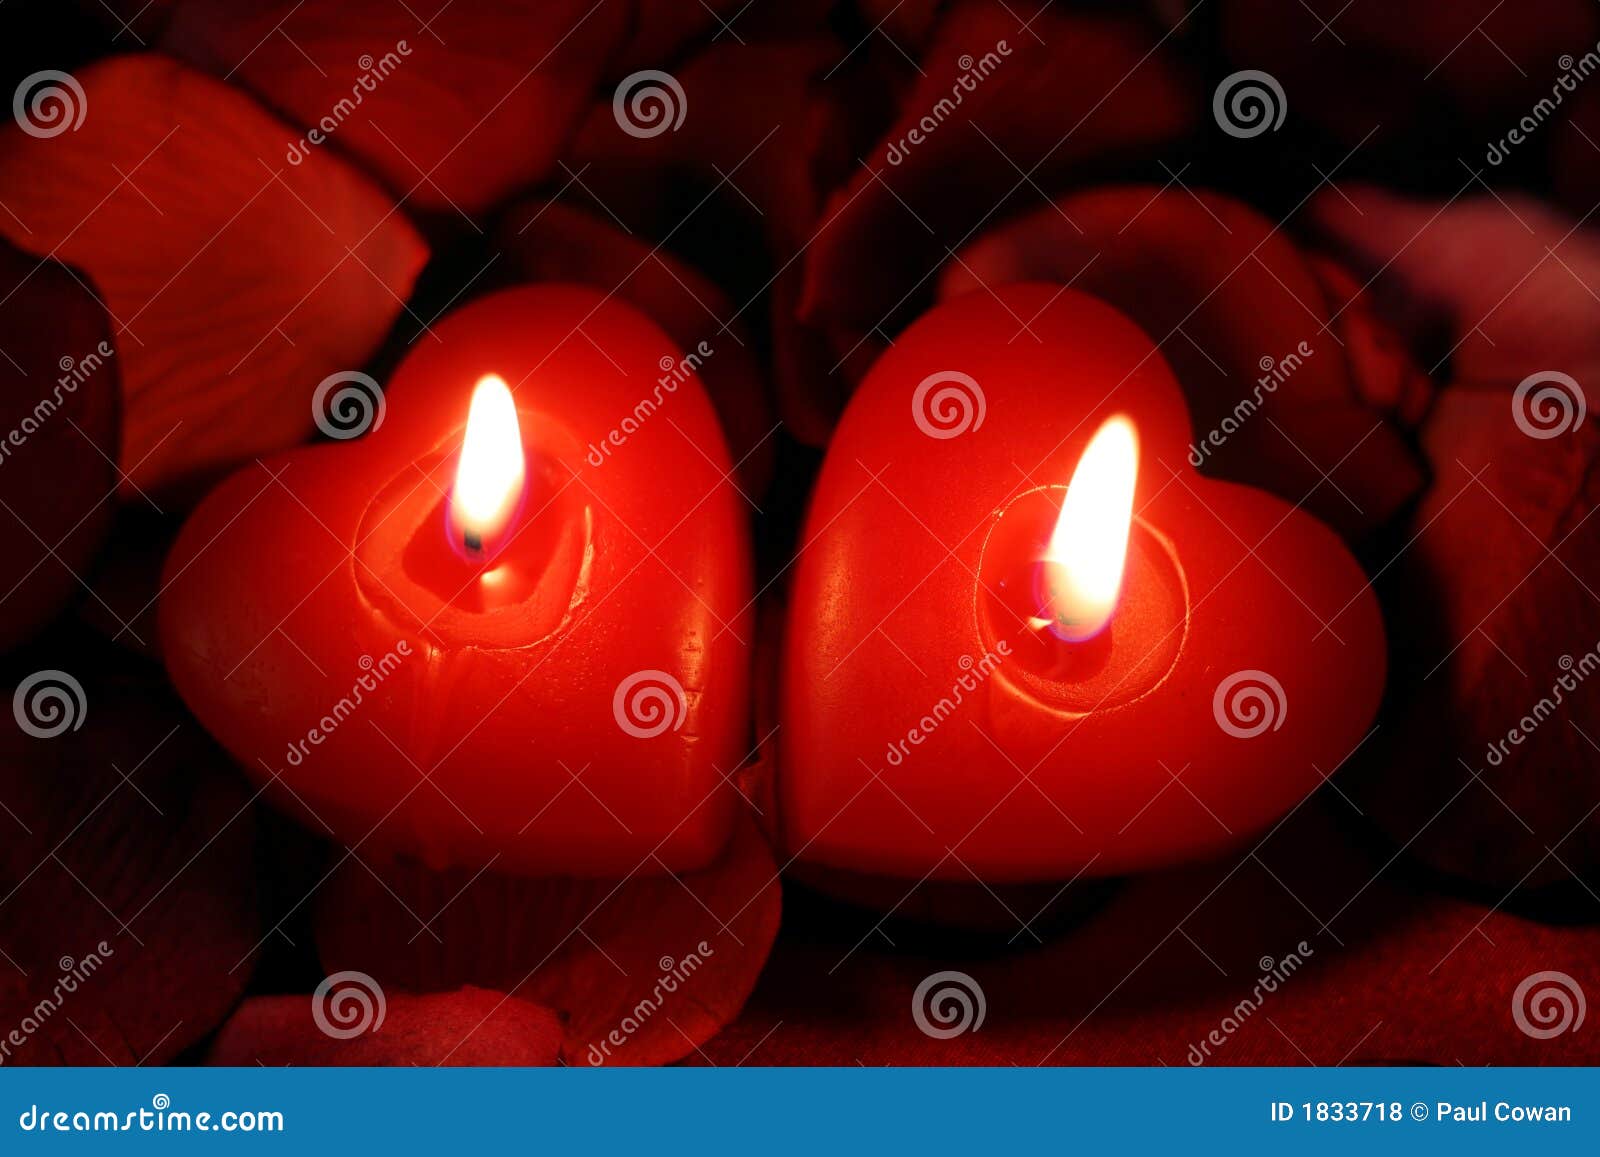 Hearts In Harmony Stock Photo Image Of Affection Petals 1833718